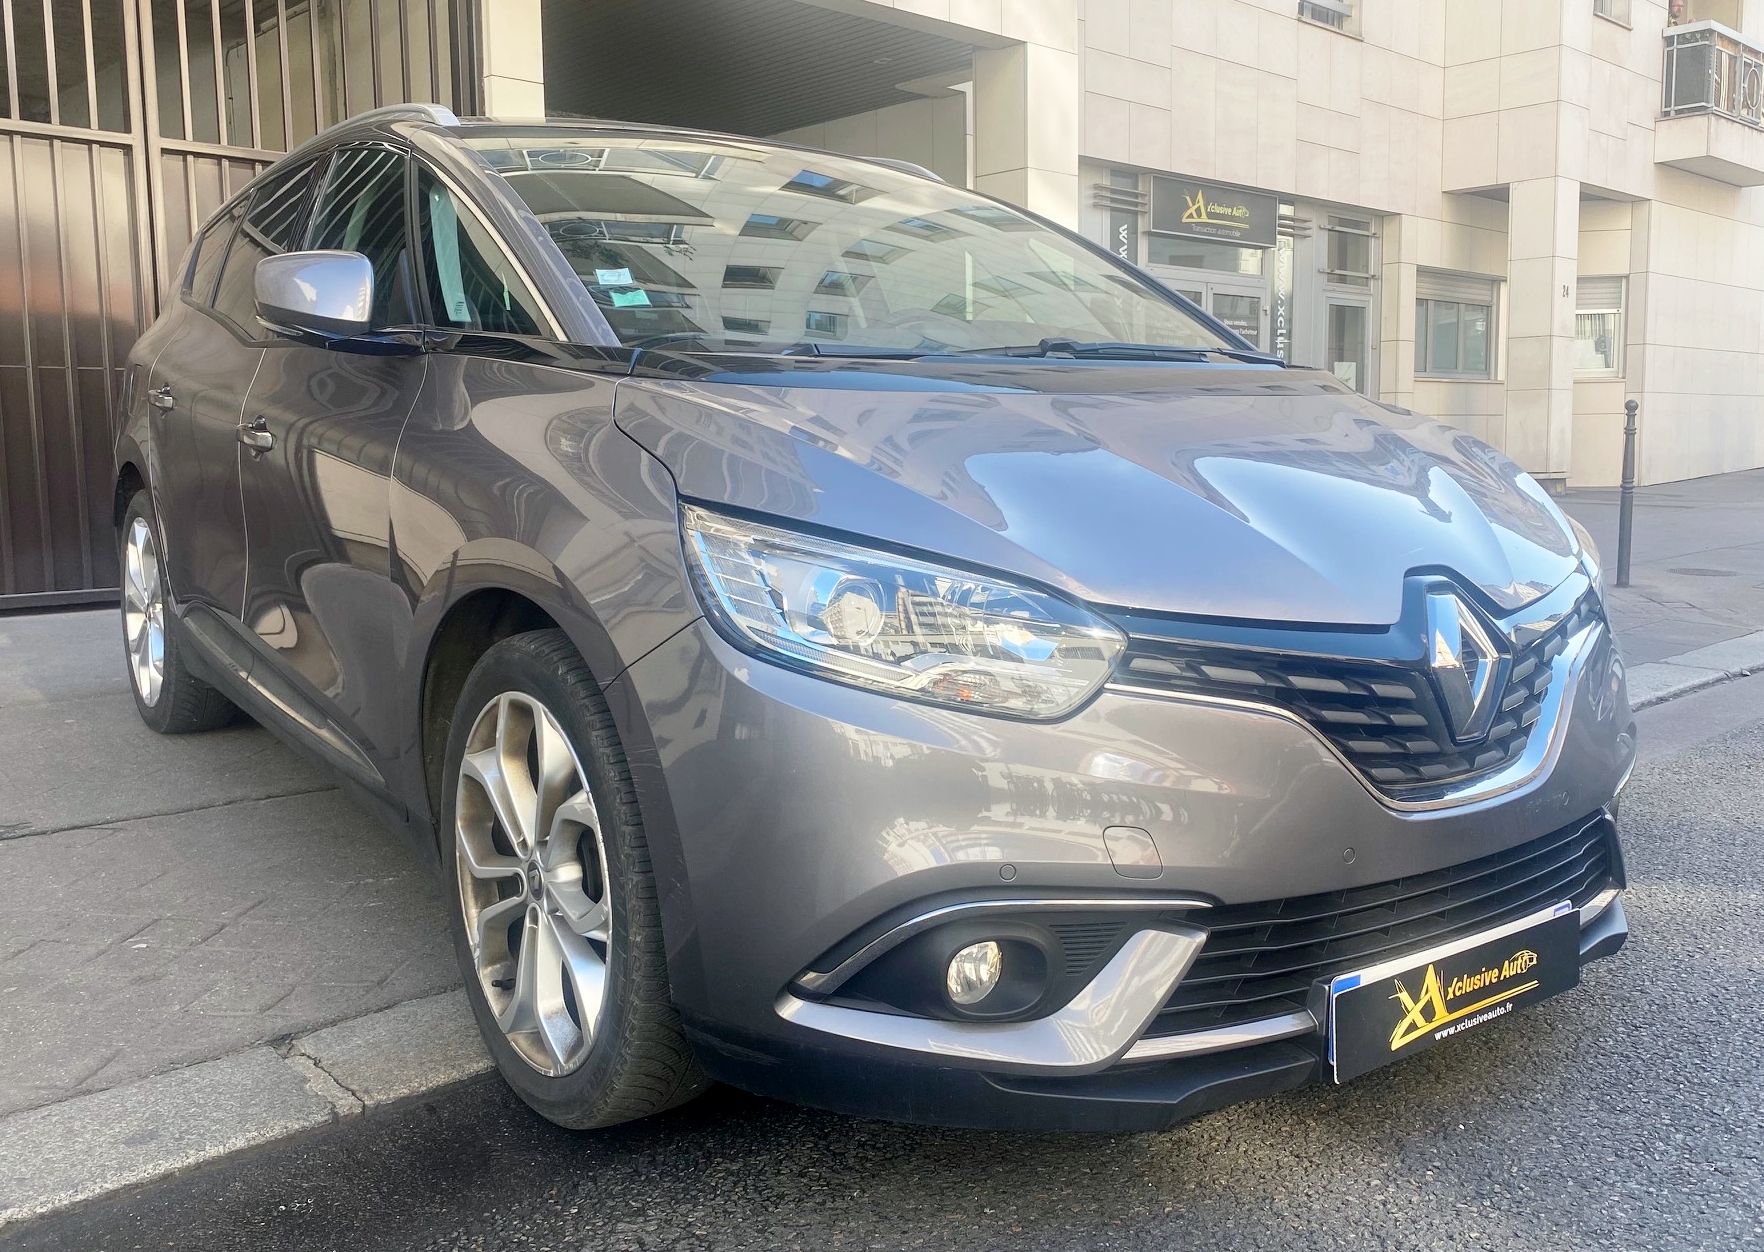 RENAULT GRAND SCENIC 1.5 DCi 110 ENERGY BUSINESS